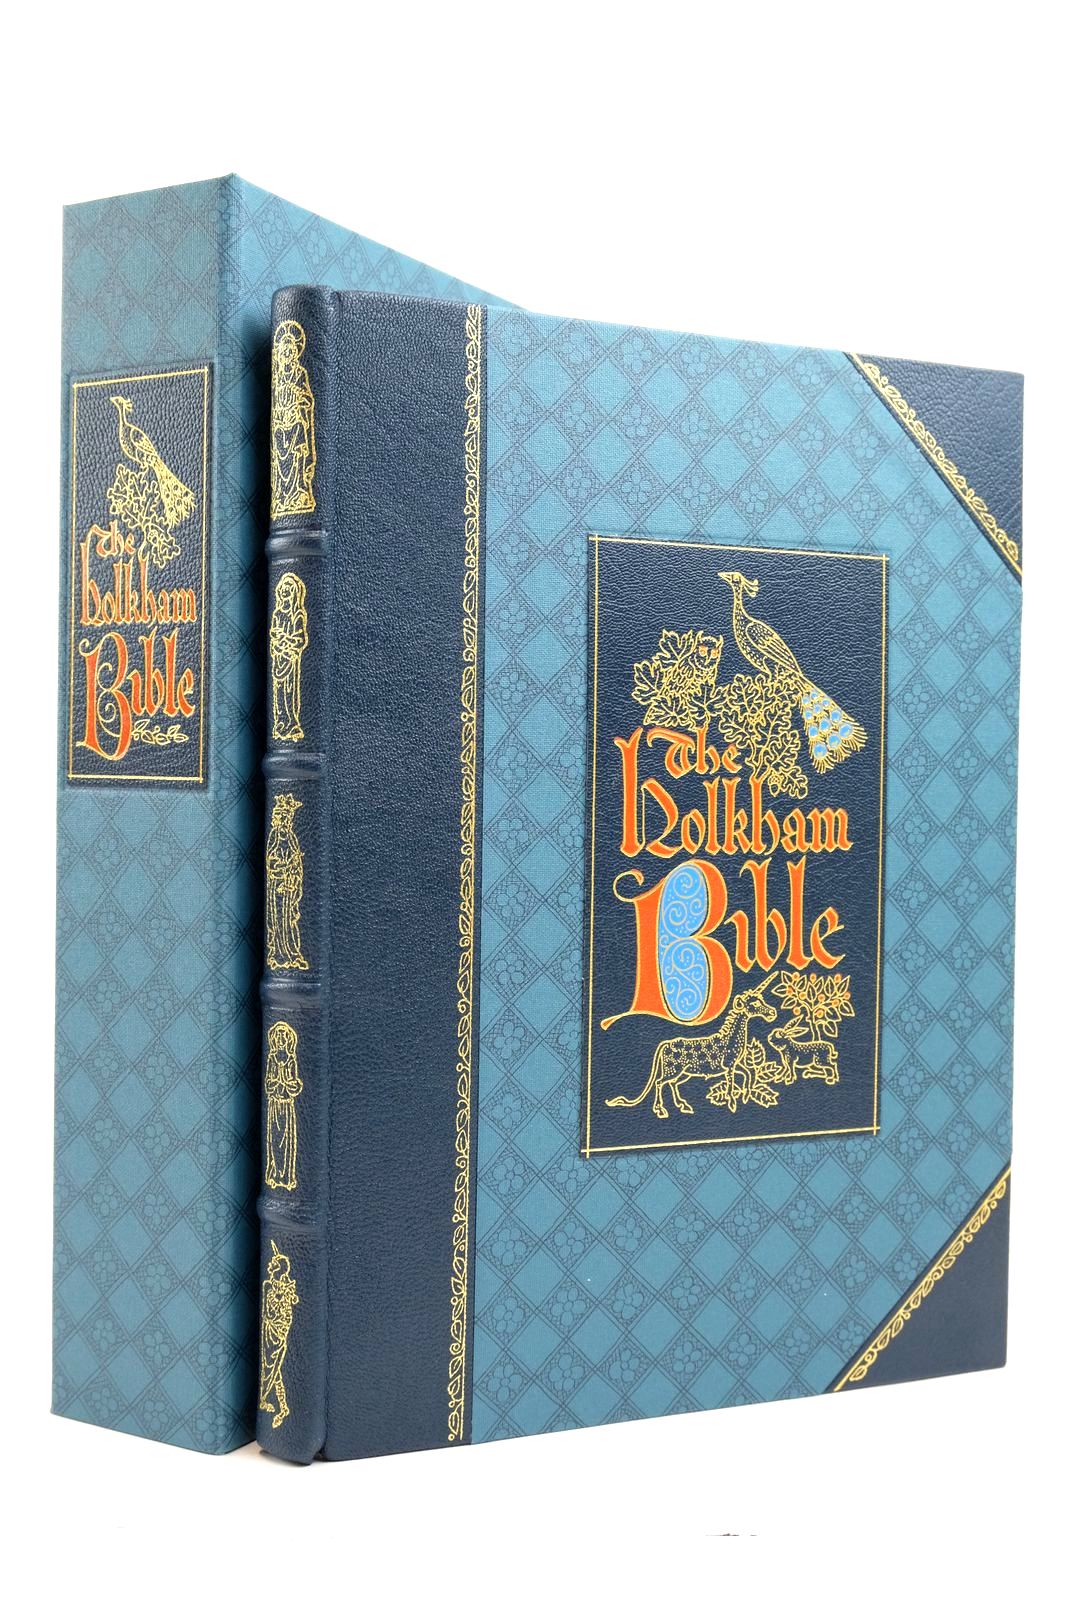 Photo of THE HOLKHAM BIBLE written by Brown, Michelle P. published by Folio Society (STOCK CODE: 2139070)  for sale by Stella & Rose's Books